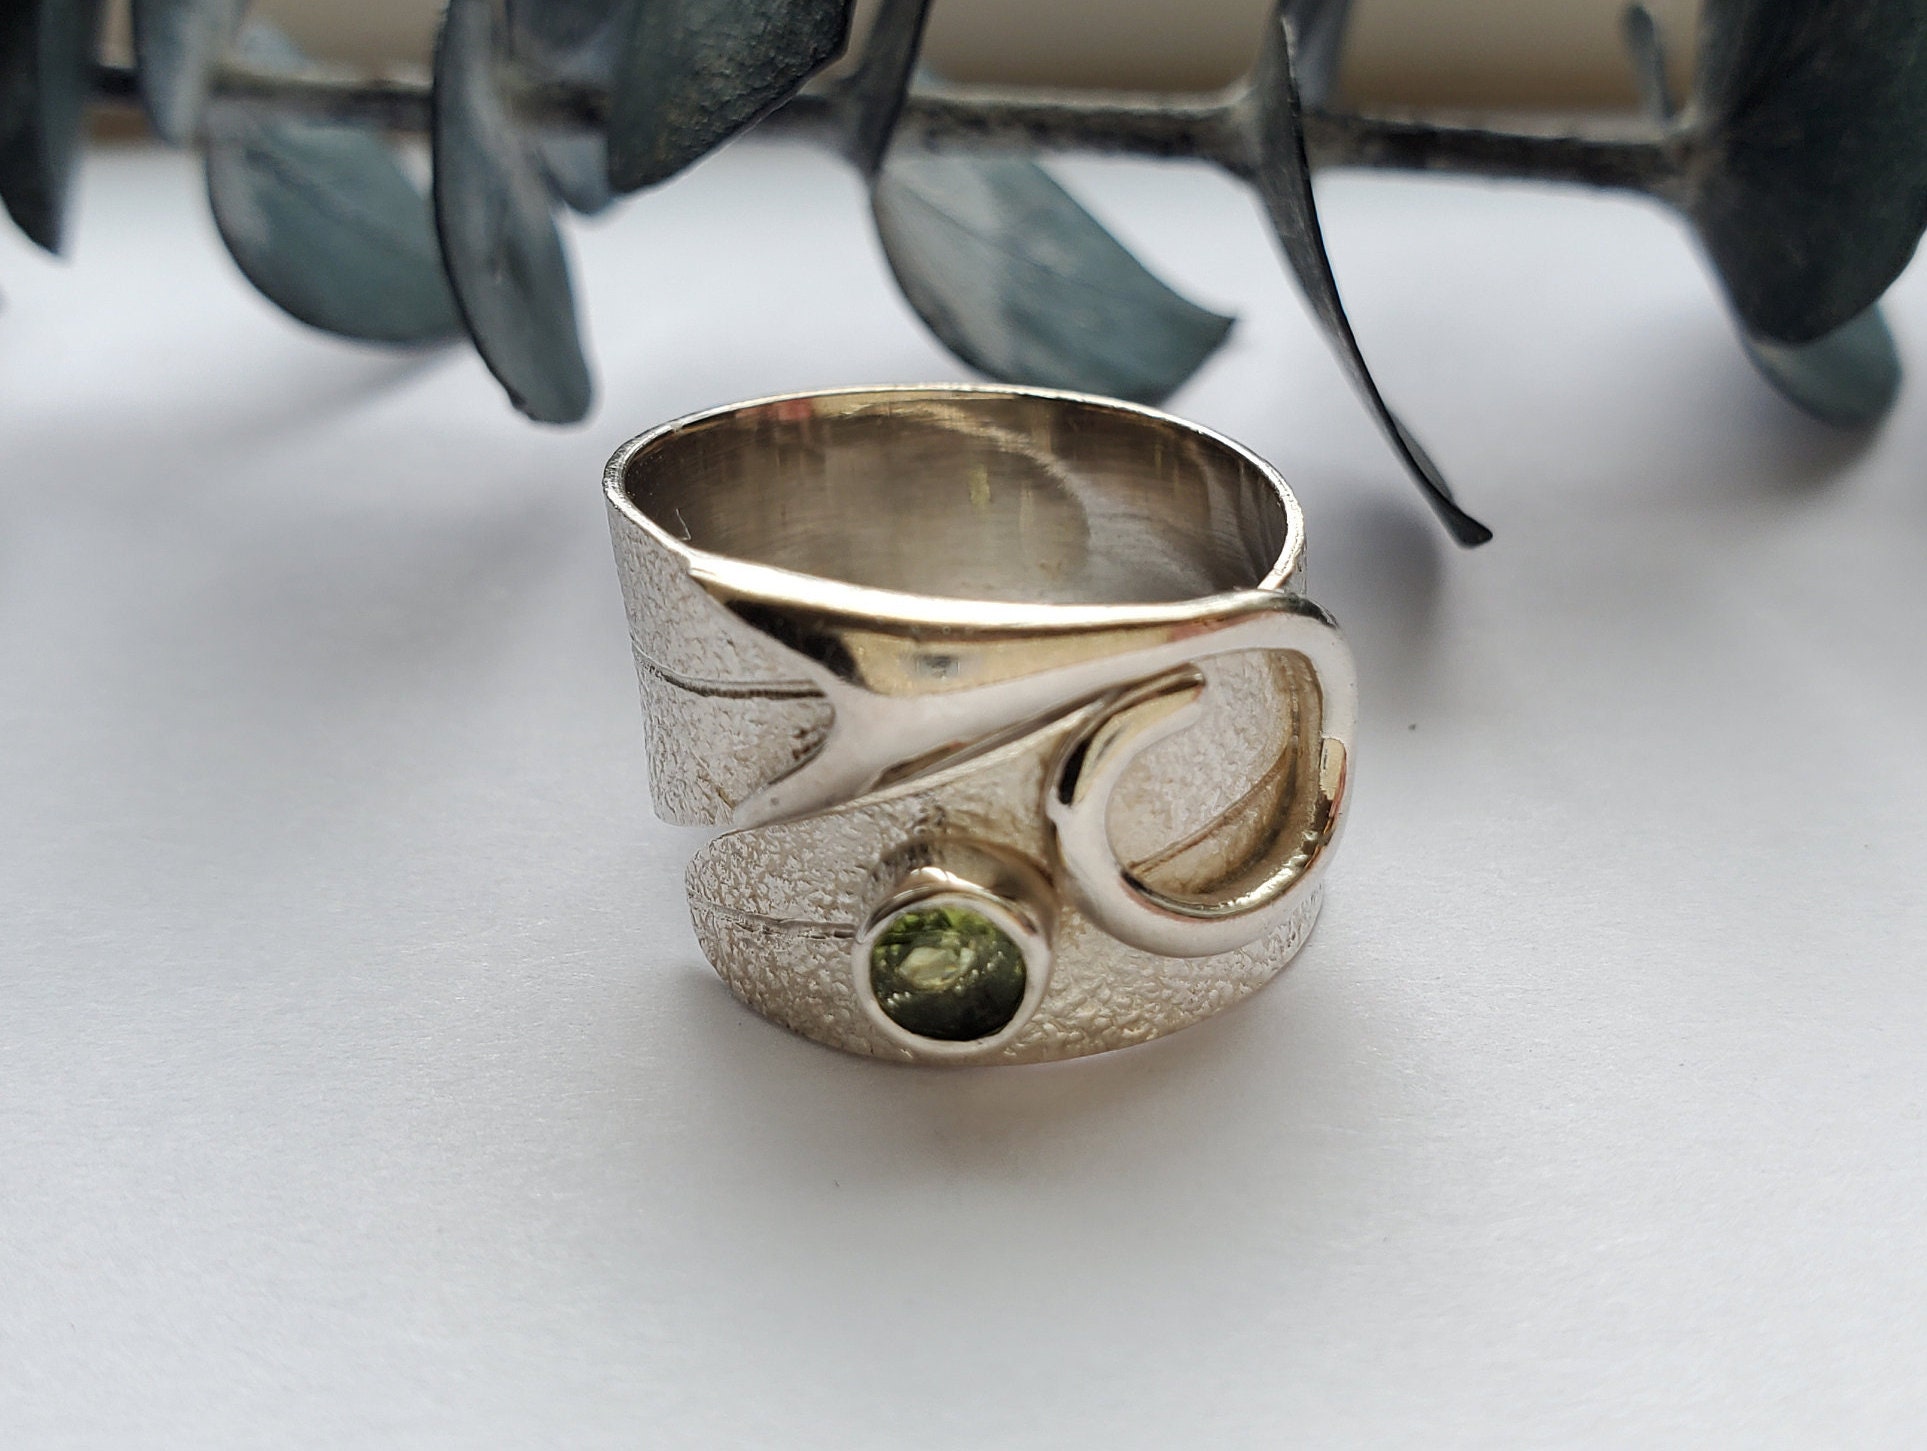 Peridot Leaf Silver Wrap Ring- Pure Whimsy Jewelry Size 5.5 to 6